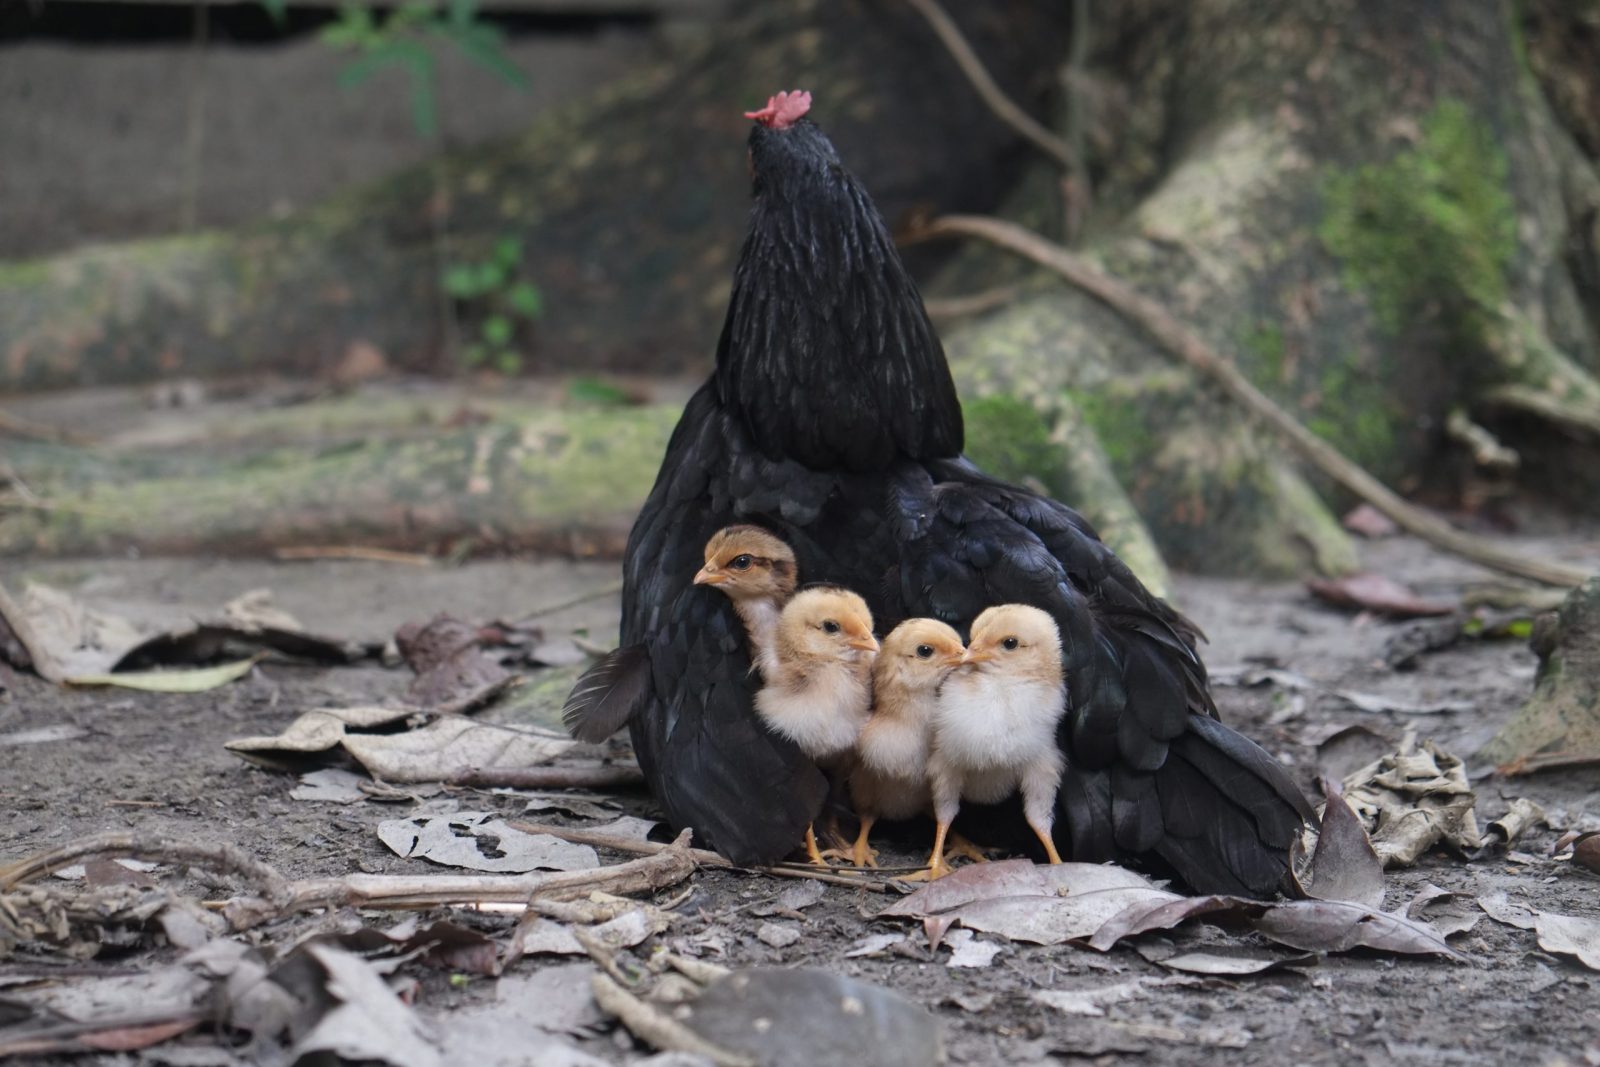 Australorps are known to be broody